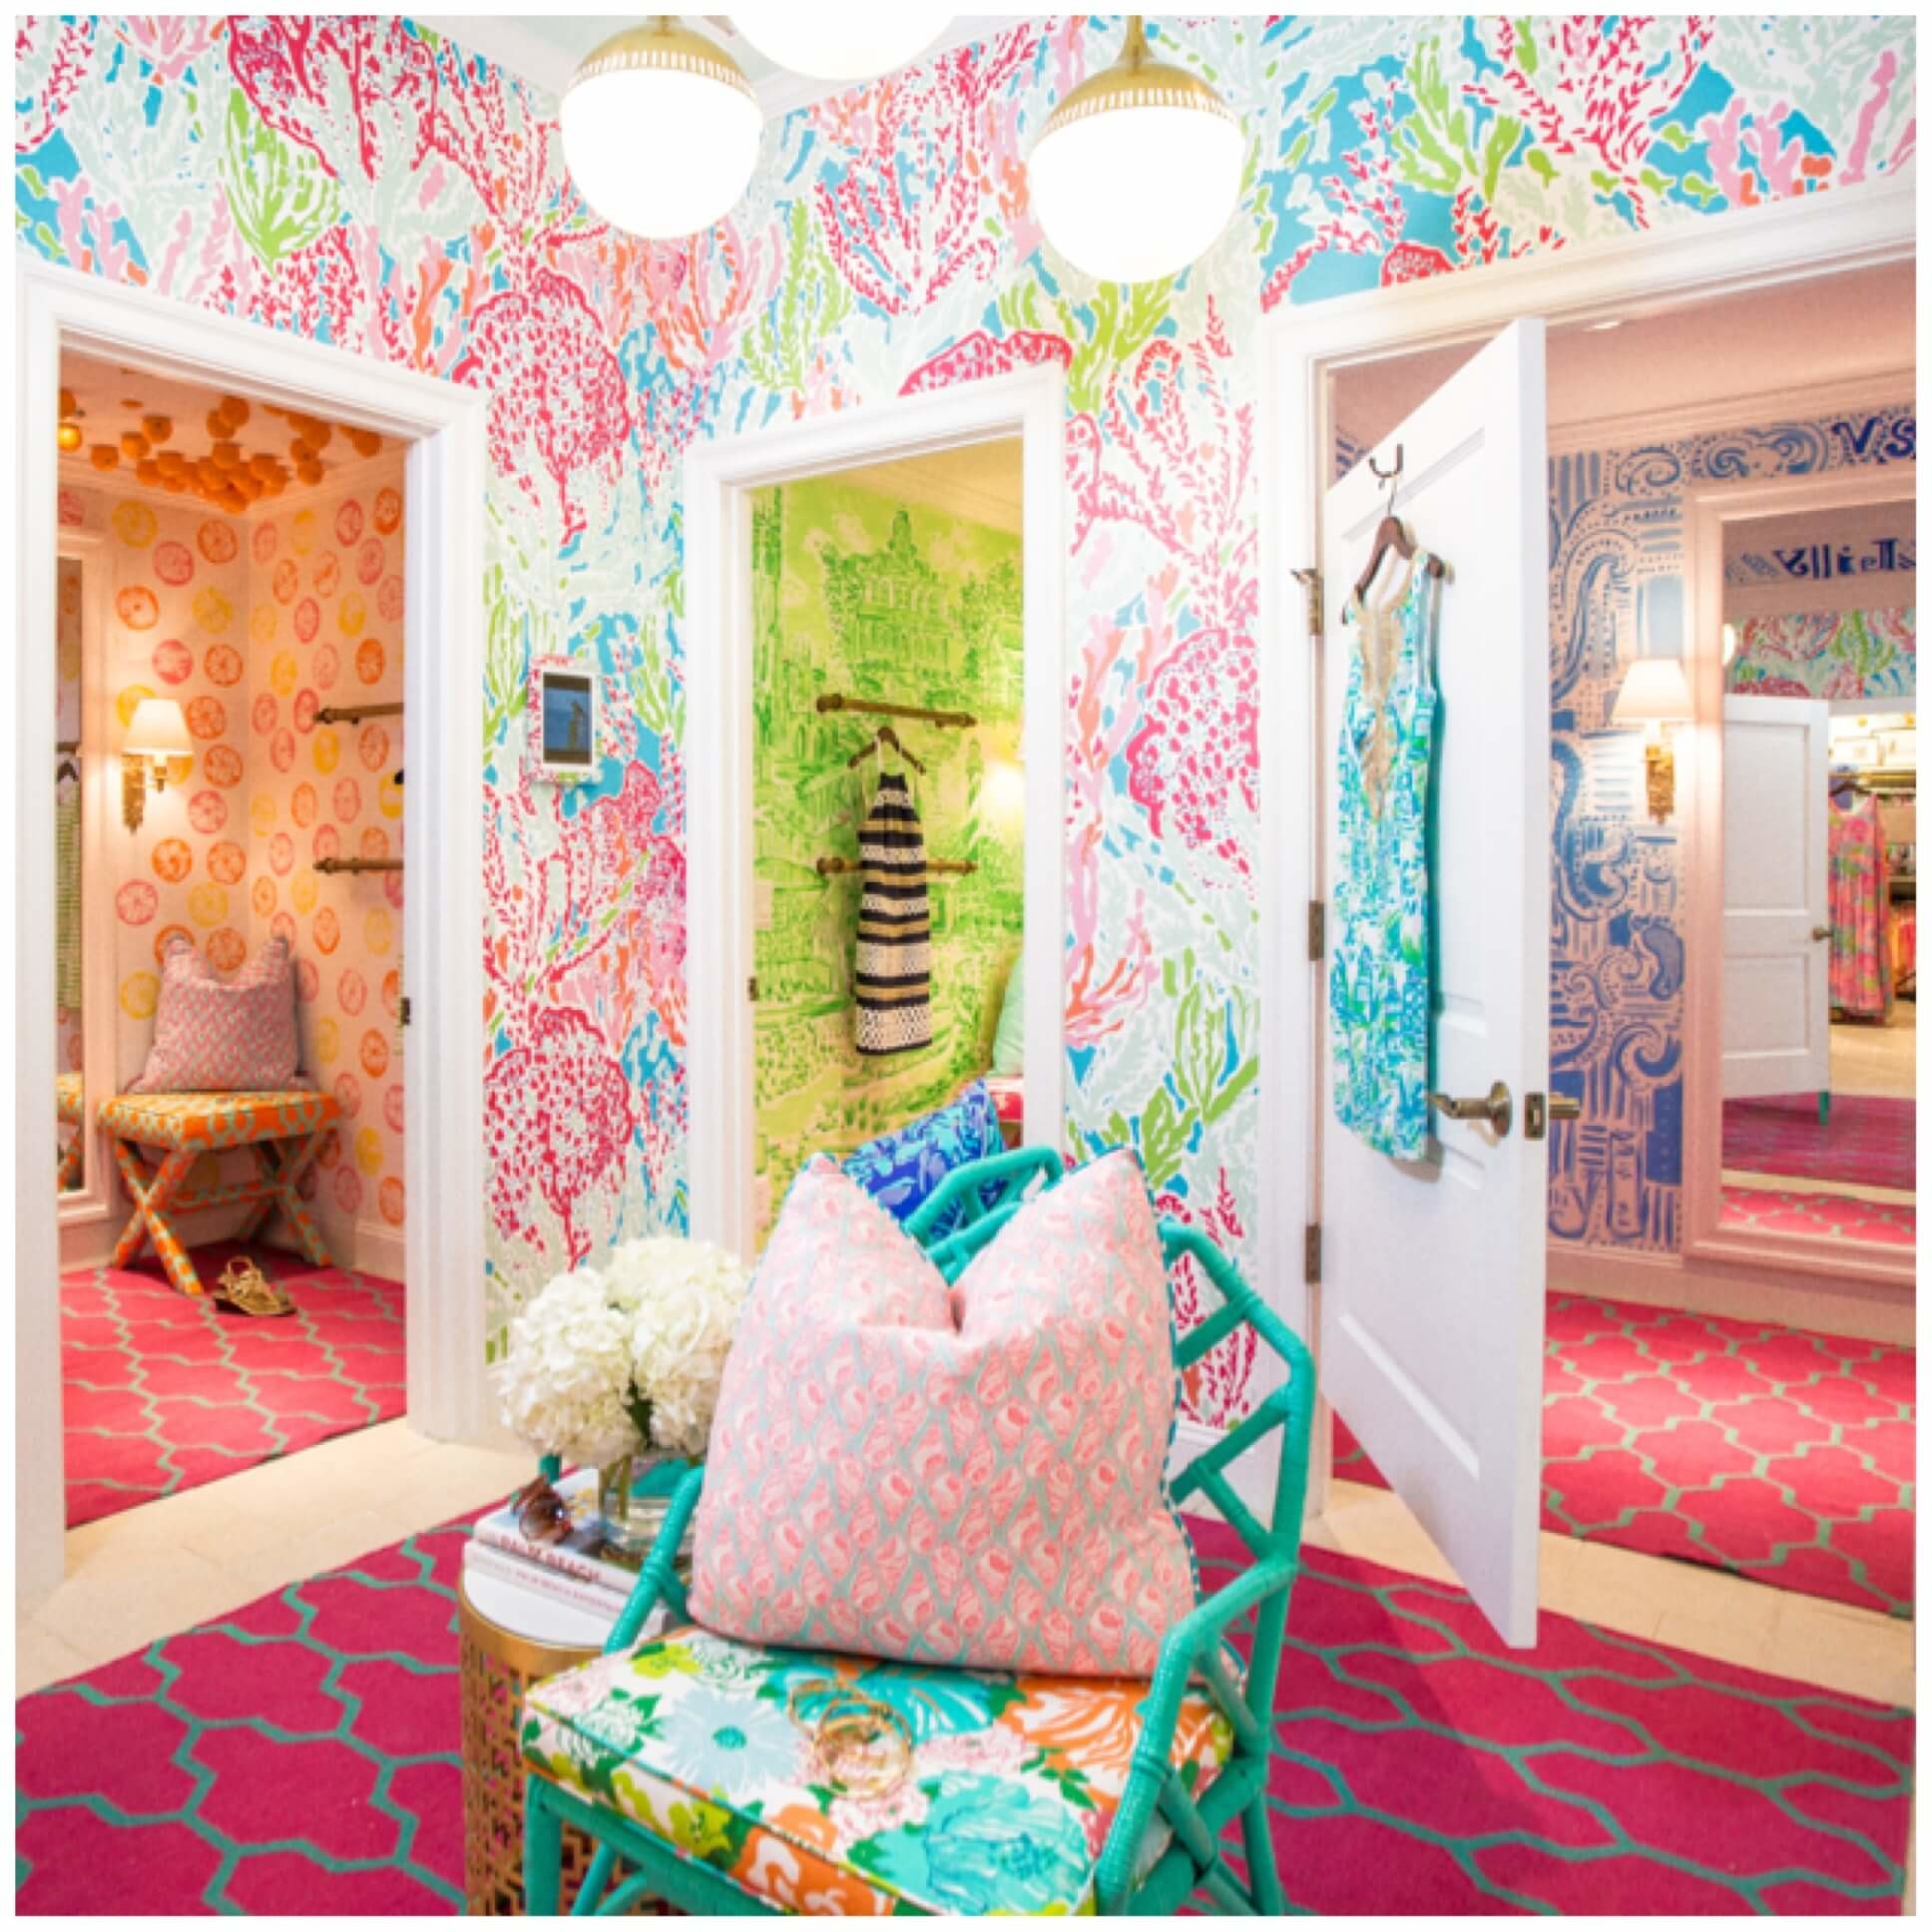 1936x1936 Image of: Lilly Pulitzer Wallpaper With Chair